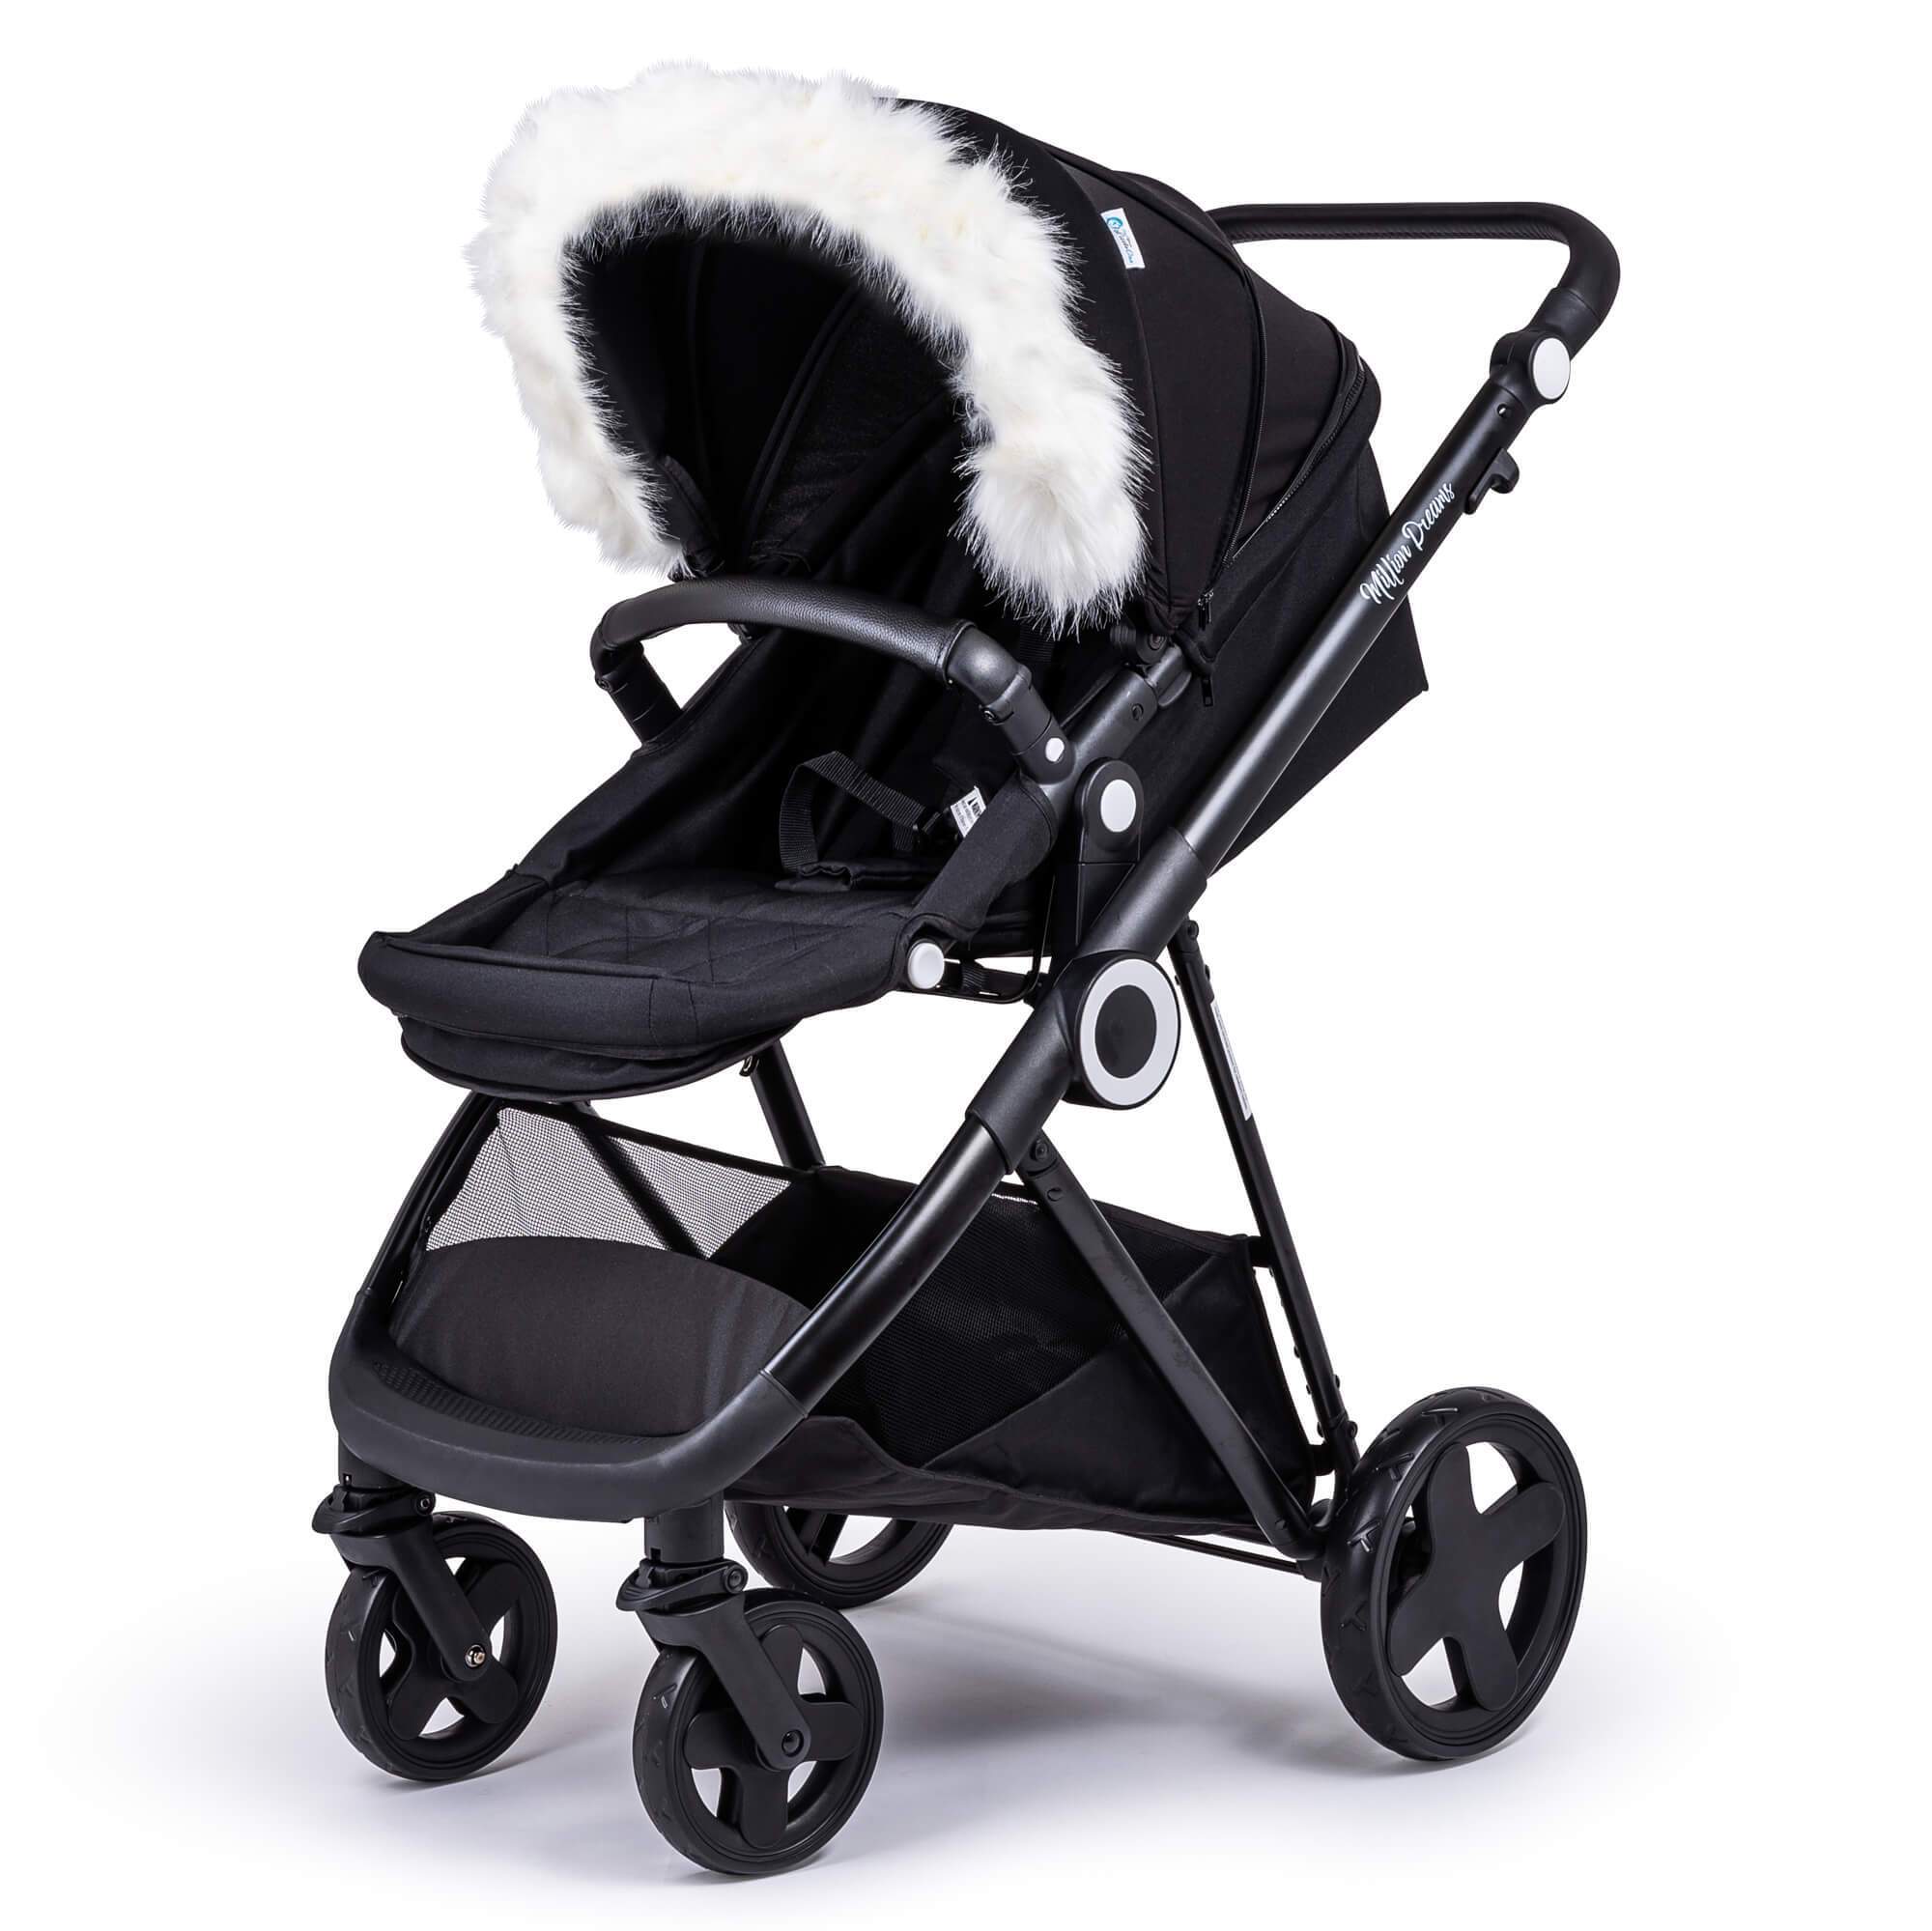 Pram Fur Hood Trim Attachment for Pushchair Compatible with Esprit - For Your Little One